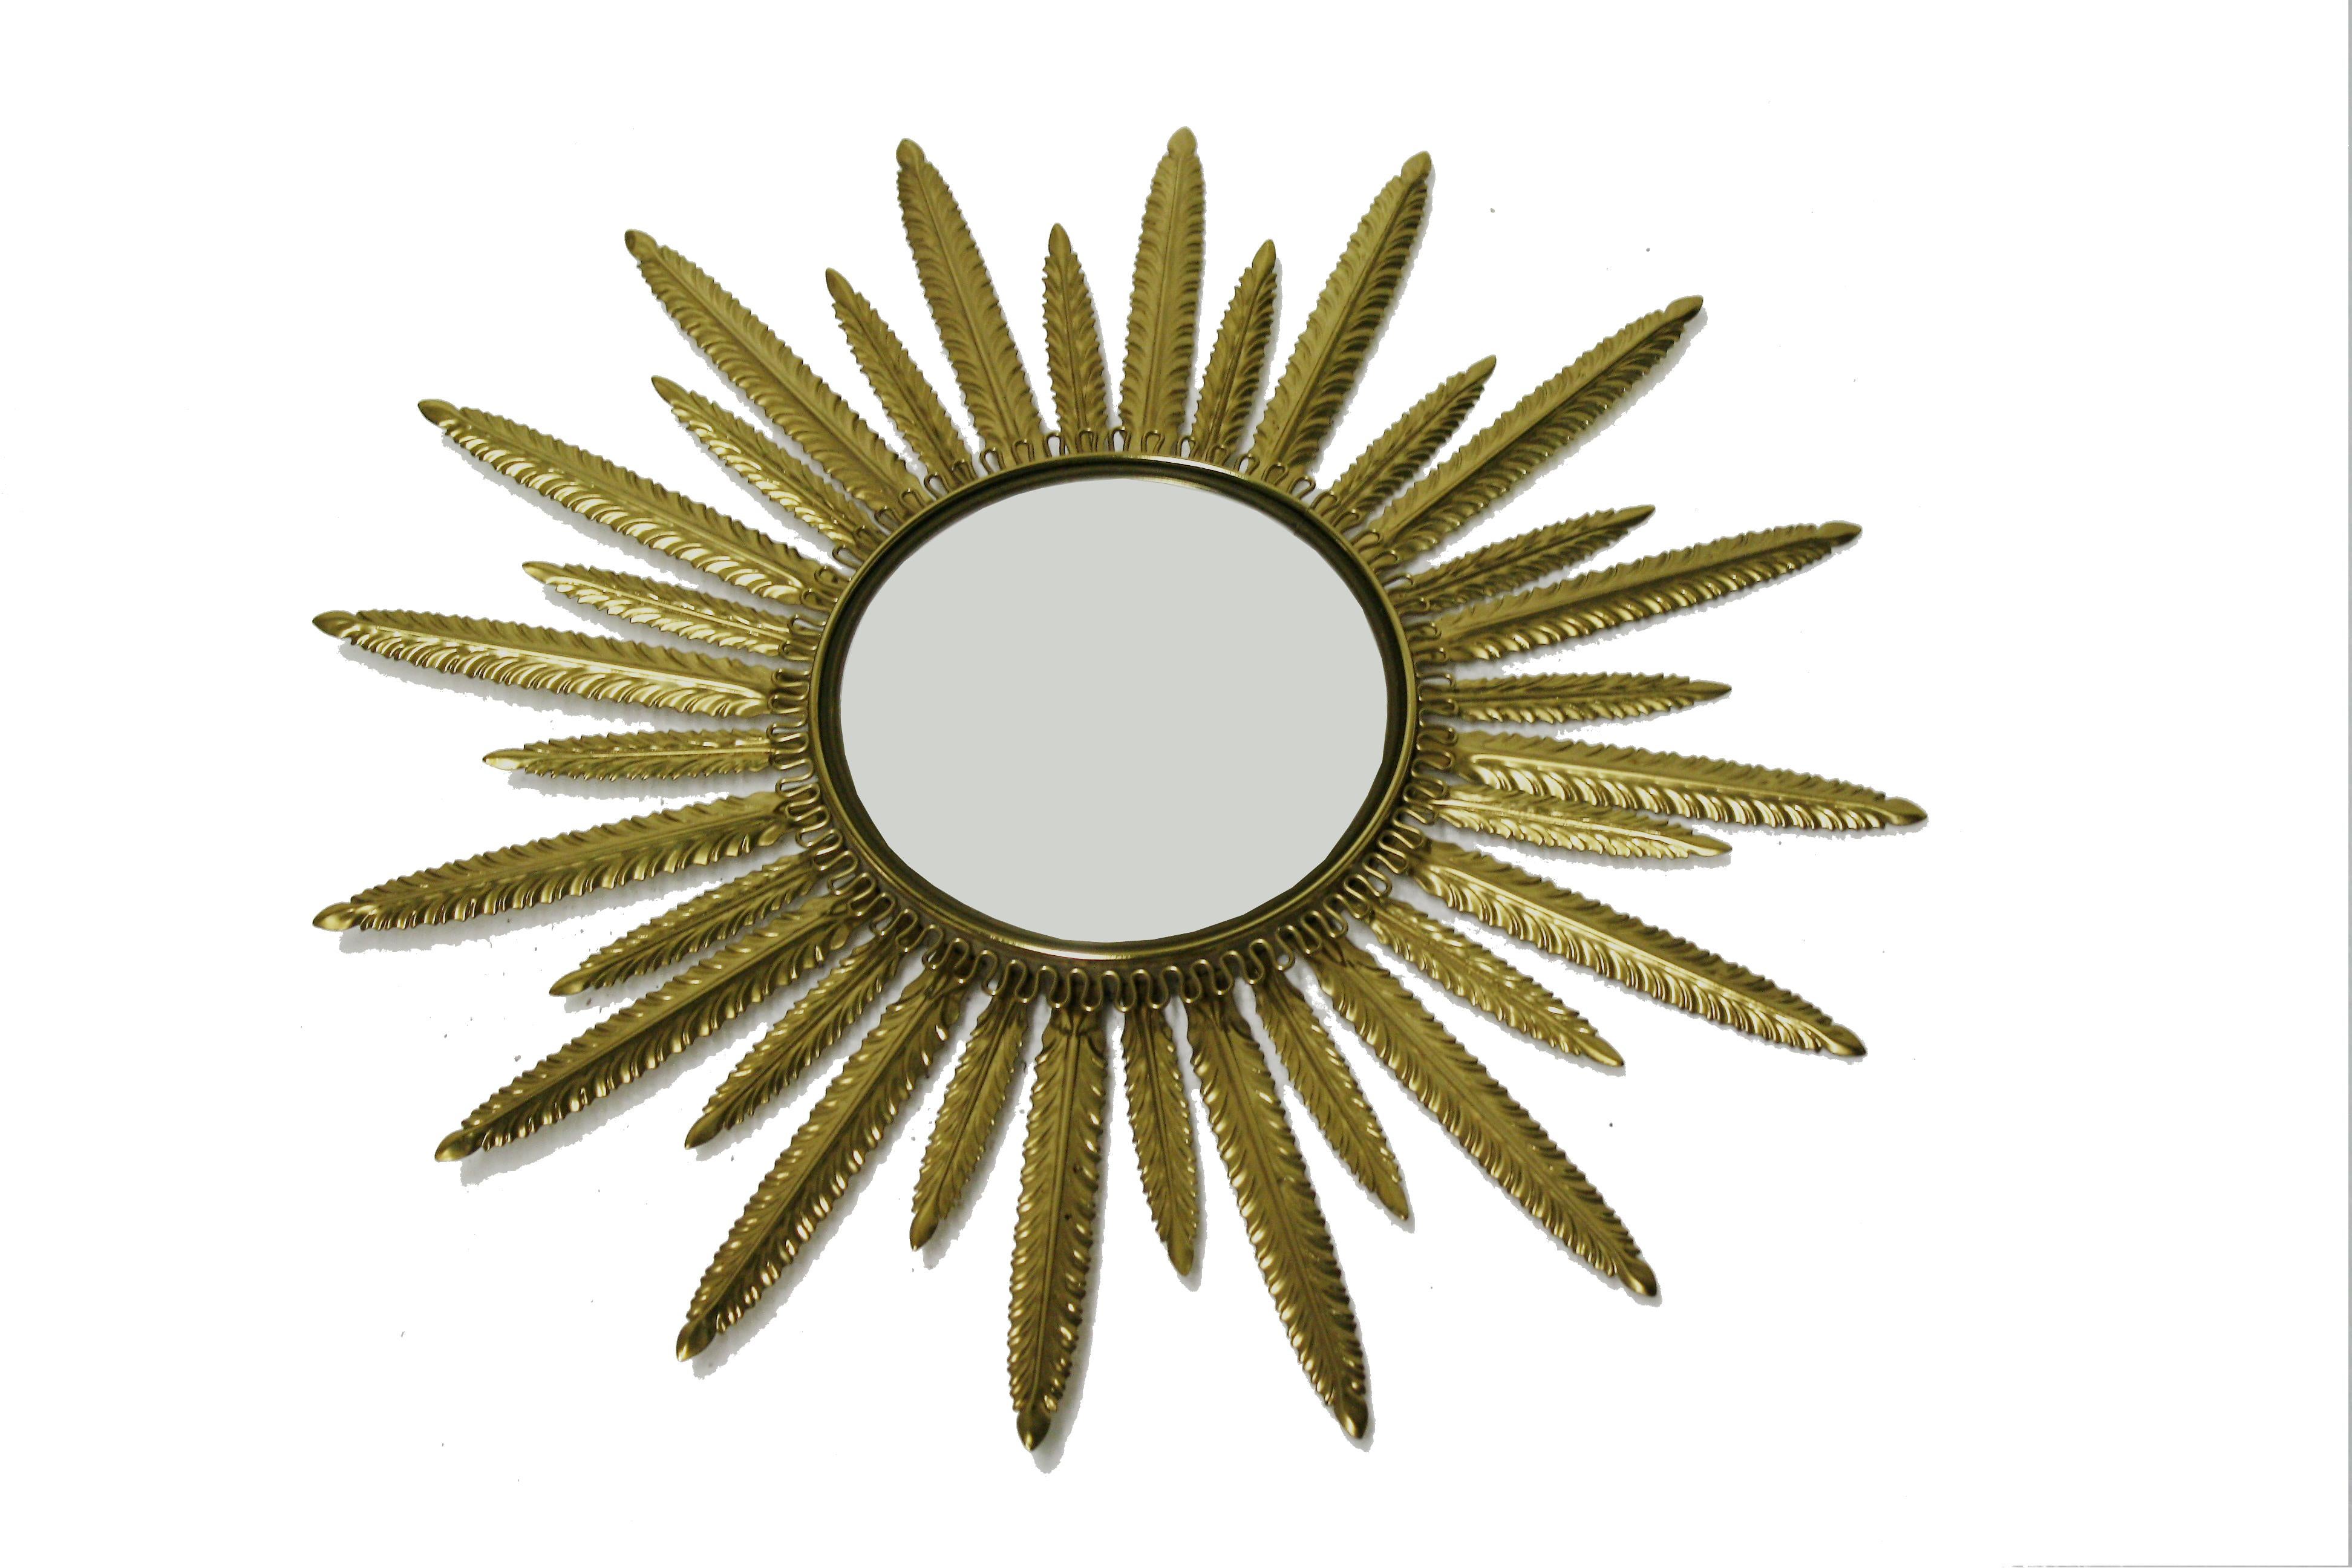 Midcentury brass sunburst or flower mirror with convex glass.

This mirror fits in most interiors and is a perfect add-on for a Regency style interior.

The mirror is made from patinated brass.

Good condition.

France - 1960s

Diameter: